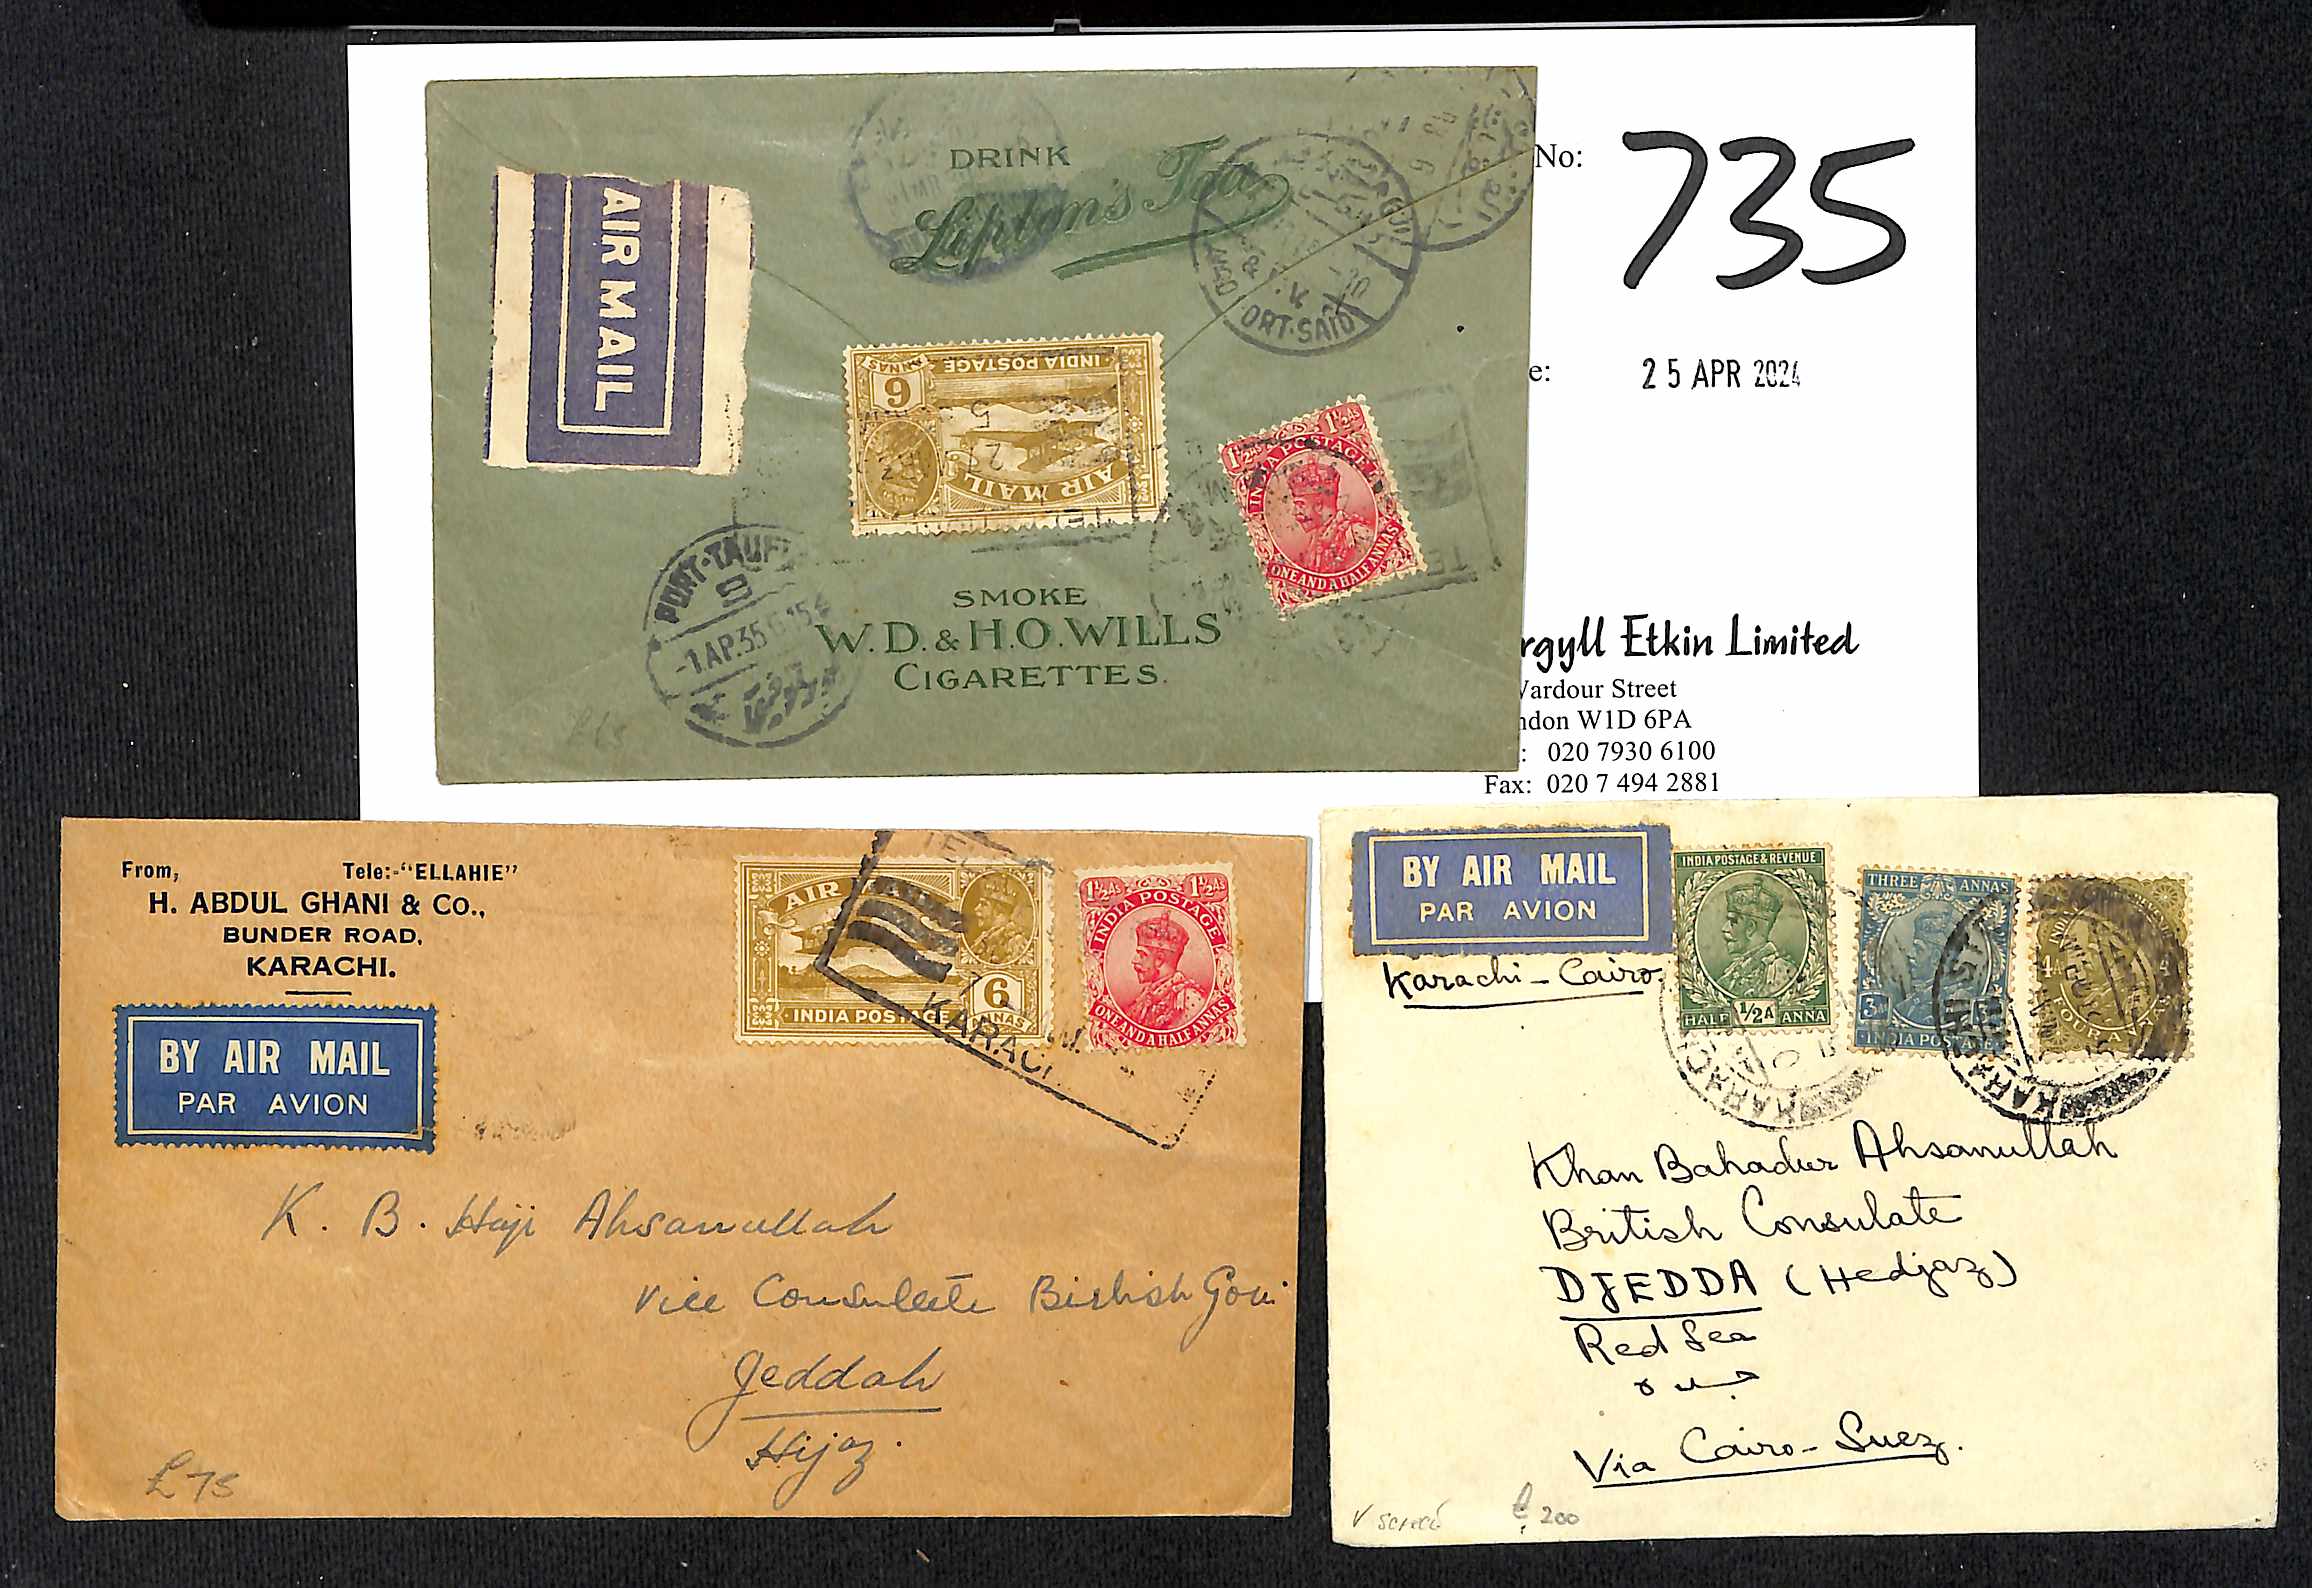 Saudi Arabia. 1932-35 Commercial air mail covers from Karachi to Jeddah franked 7½a, all flown